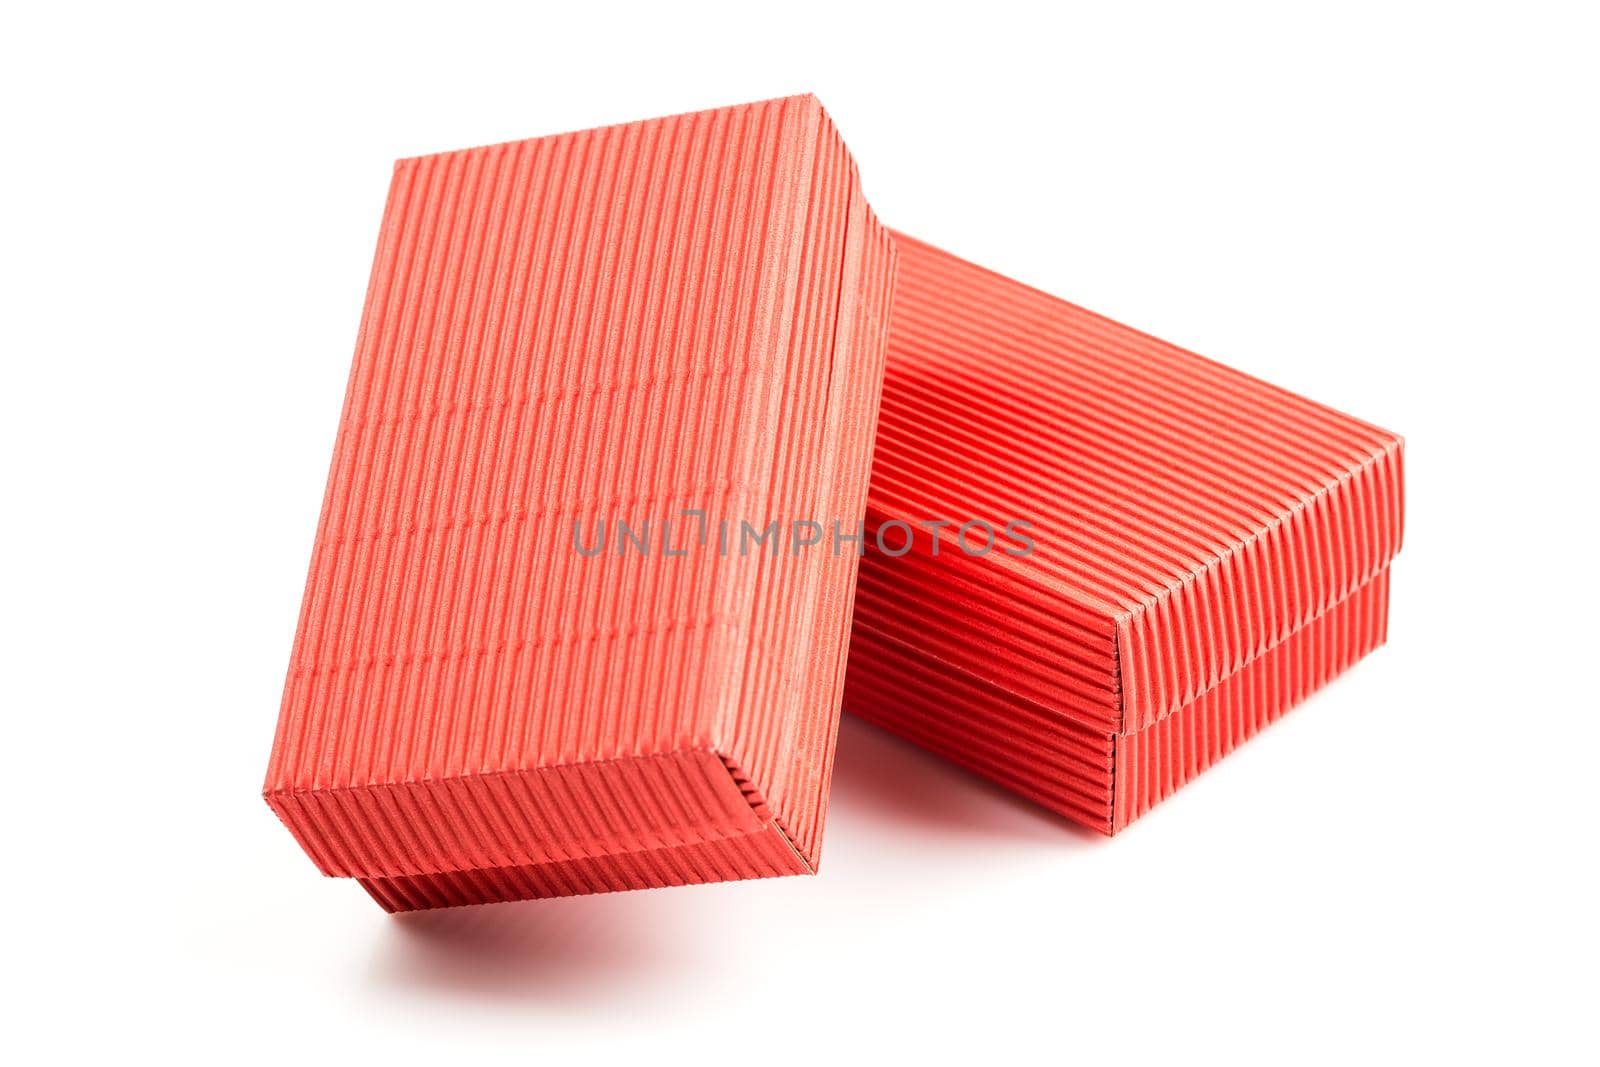 Two red closed corrugated cardboard boxes isolated on white. Valentine's Day gift box packaging concept